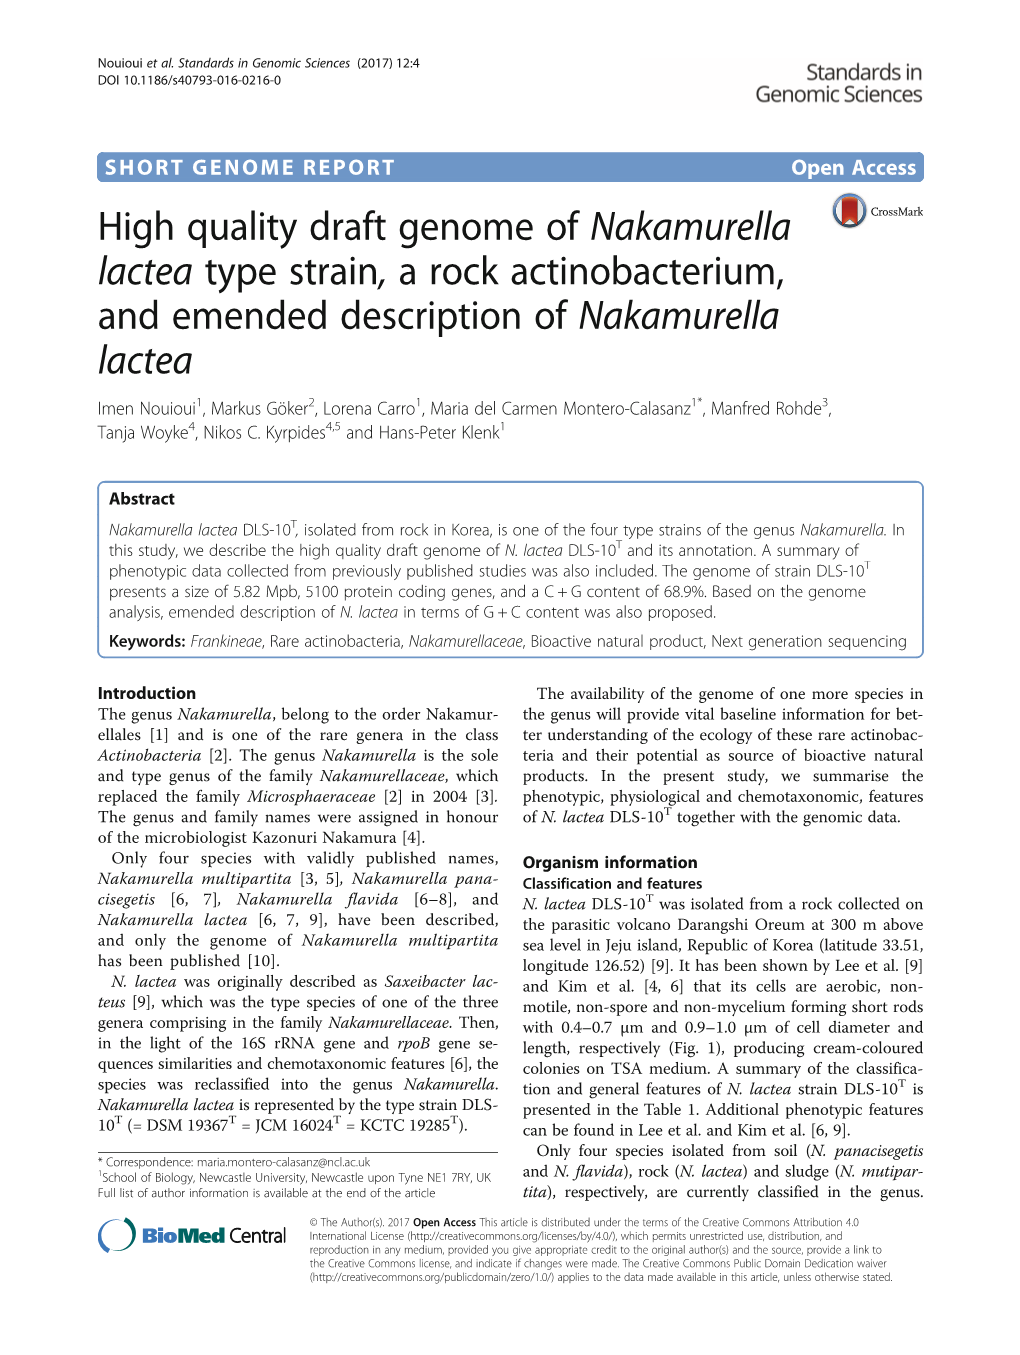 High Quality Draft Genome of Nakamurella Lactea Type Strain, a Rock Actinobacterium, and Emended Description of Nakamurella Lactea